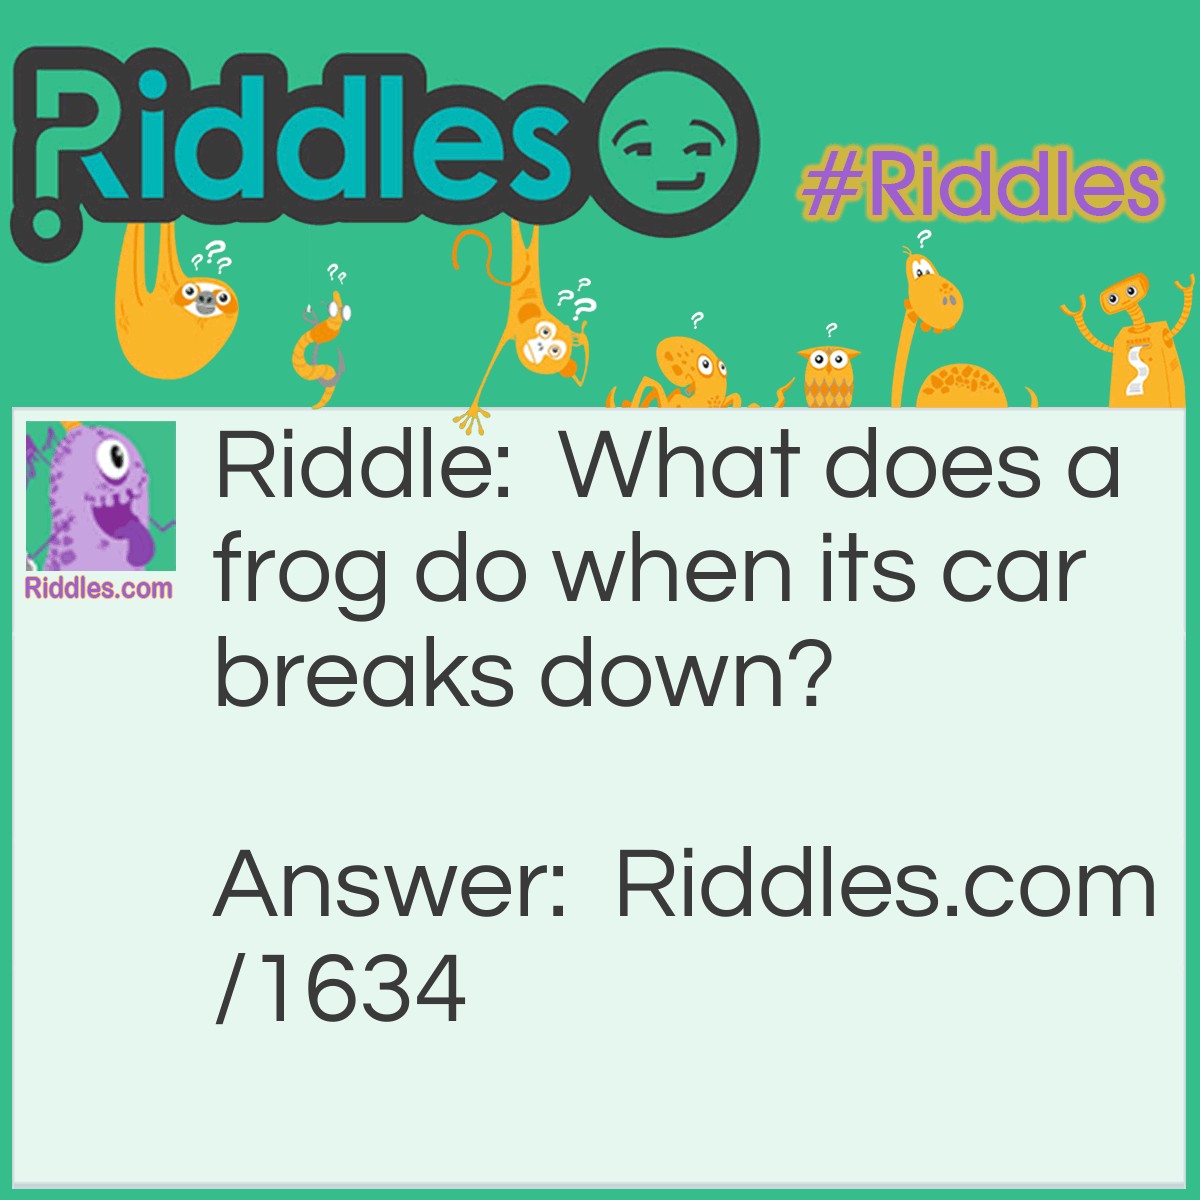 Riddle: What does a frog do when its car breaks down? Answer: It gets toad!